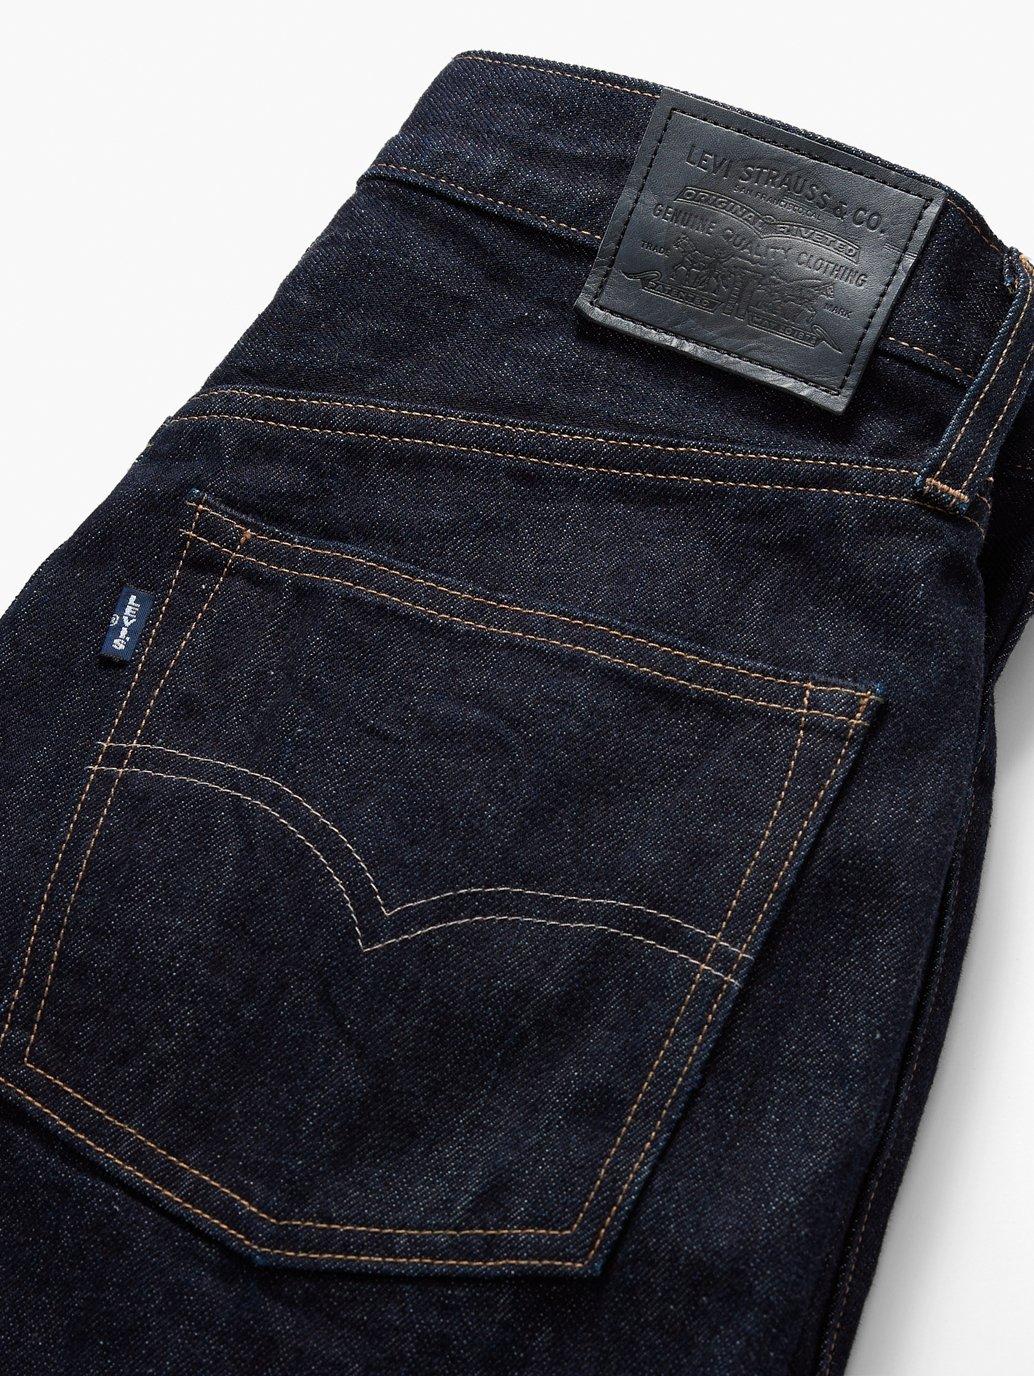 Buy Levi's® Women's Made in Japan Barrel Jeans | Levi’s® Official ...